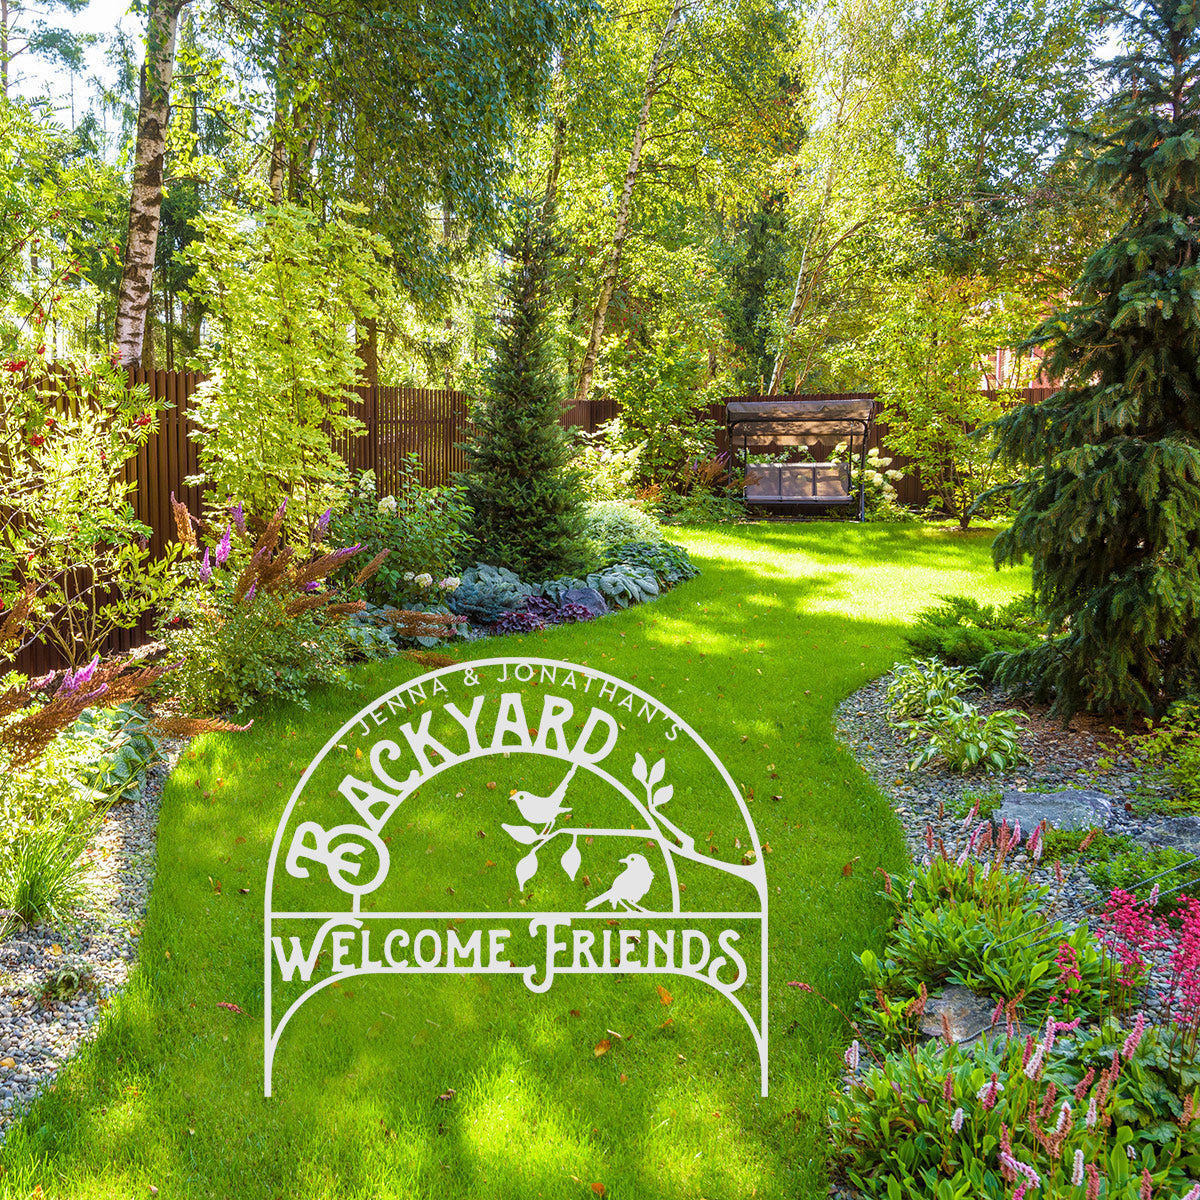 Backyard Welcome Friends metal sign staked into a manicured lawn White